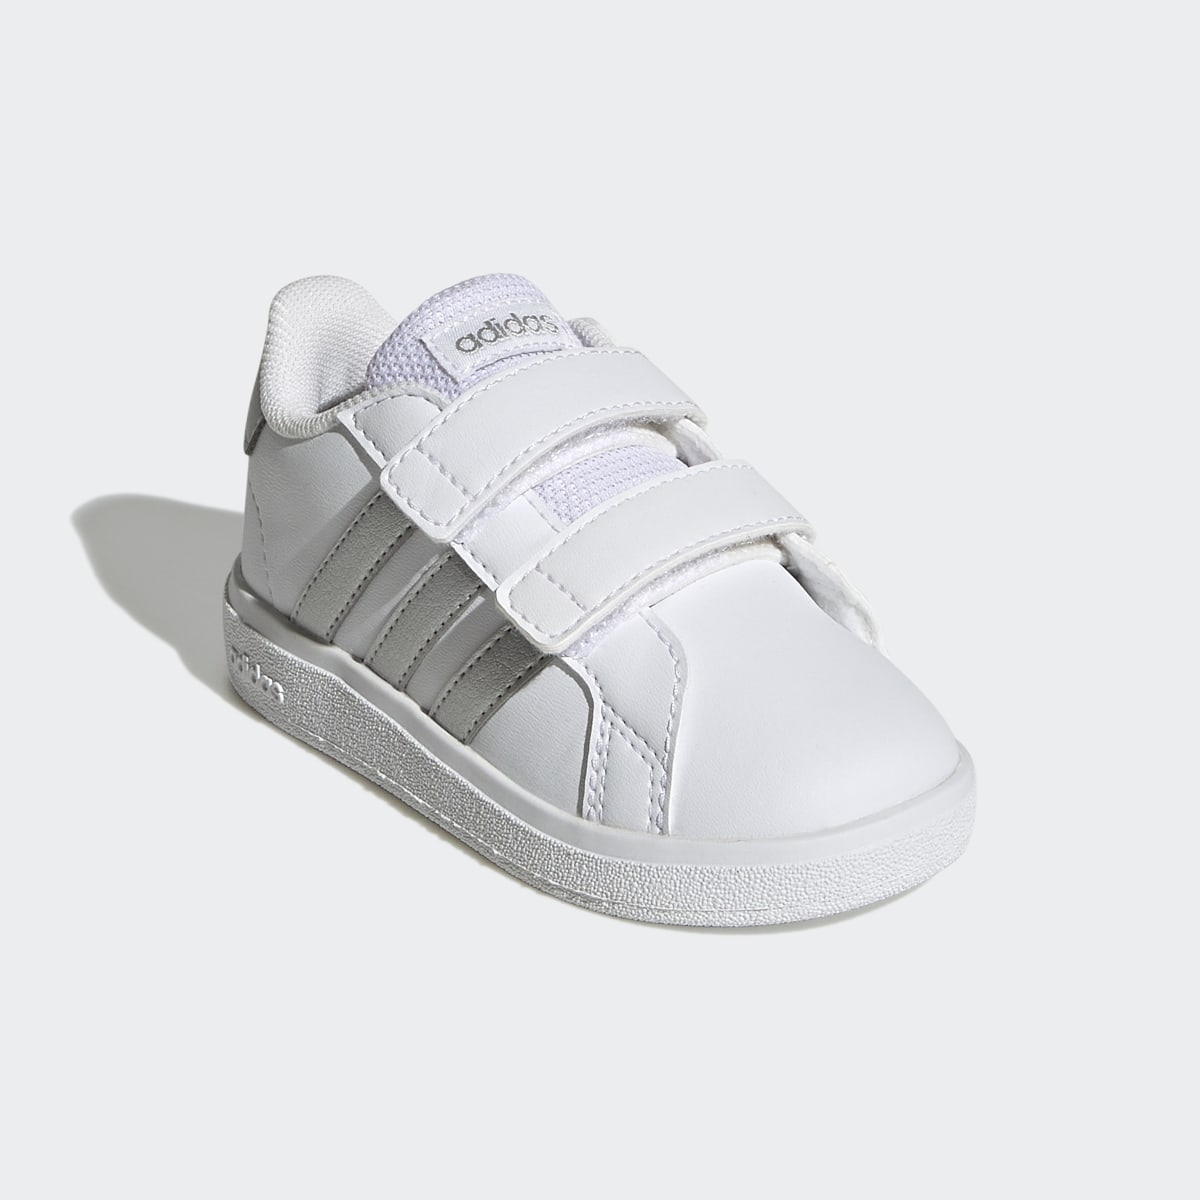 Adidas Grand Court Lifestyle Hook and Loop Schuh. 5